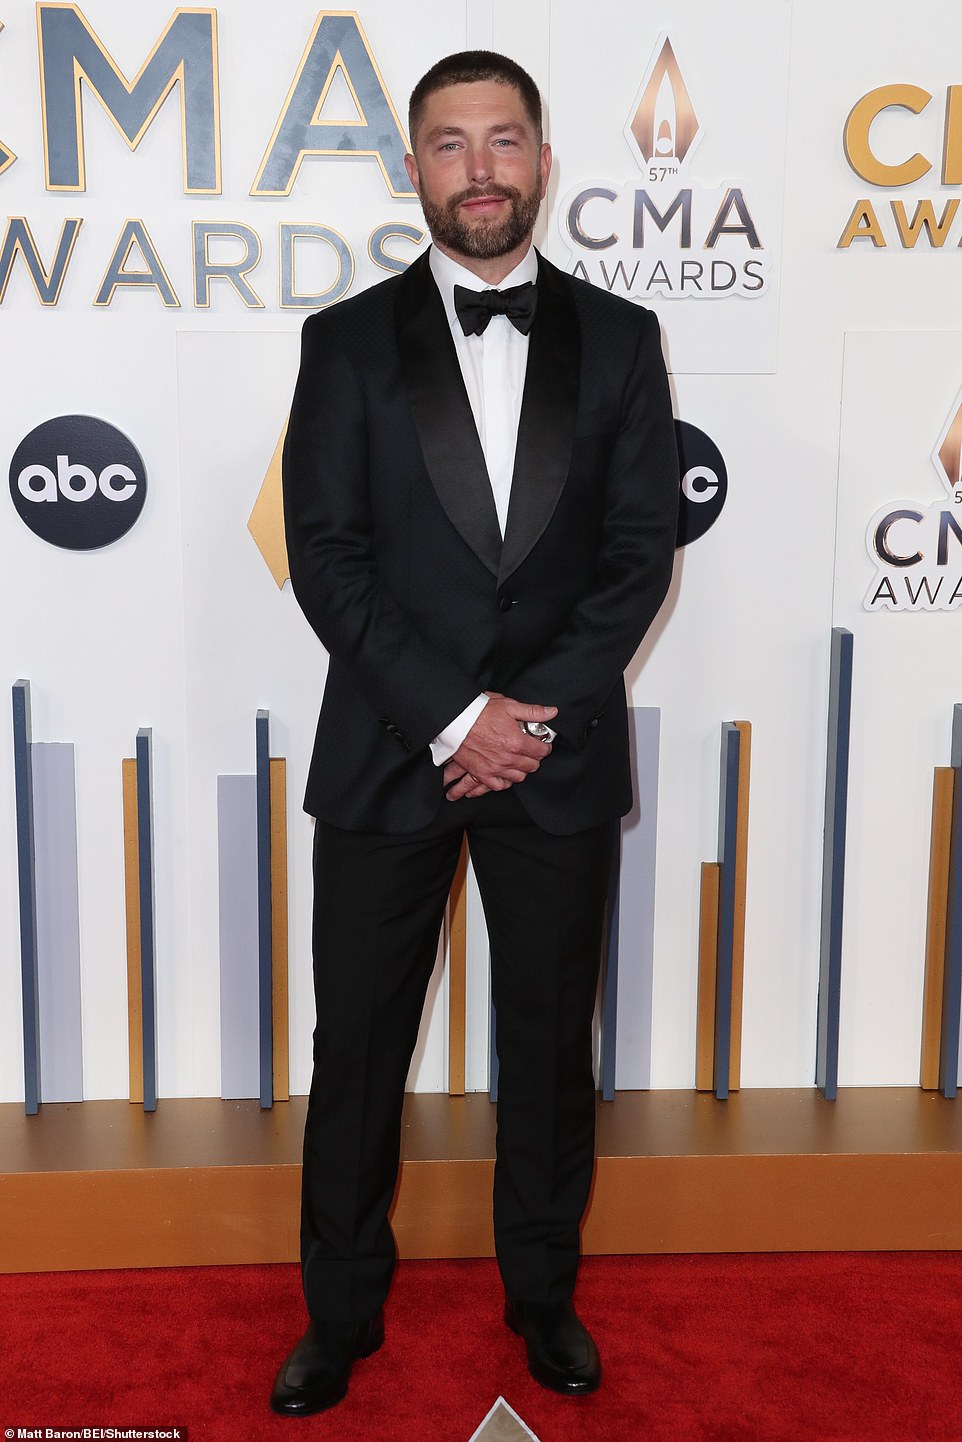 Brave: Lane looked handsome in a black tuxedo, white shirt and bow tie for the event